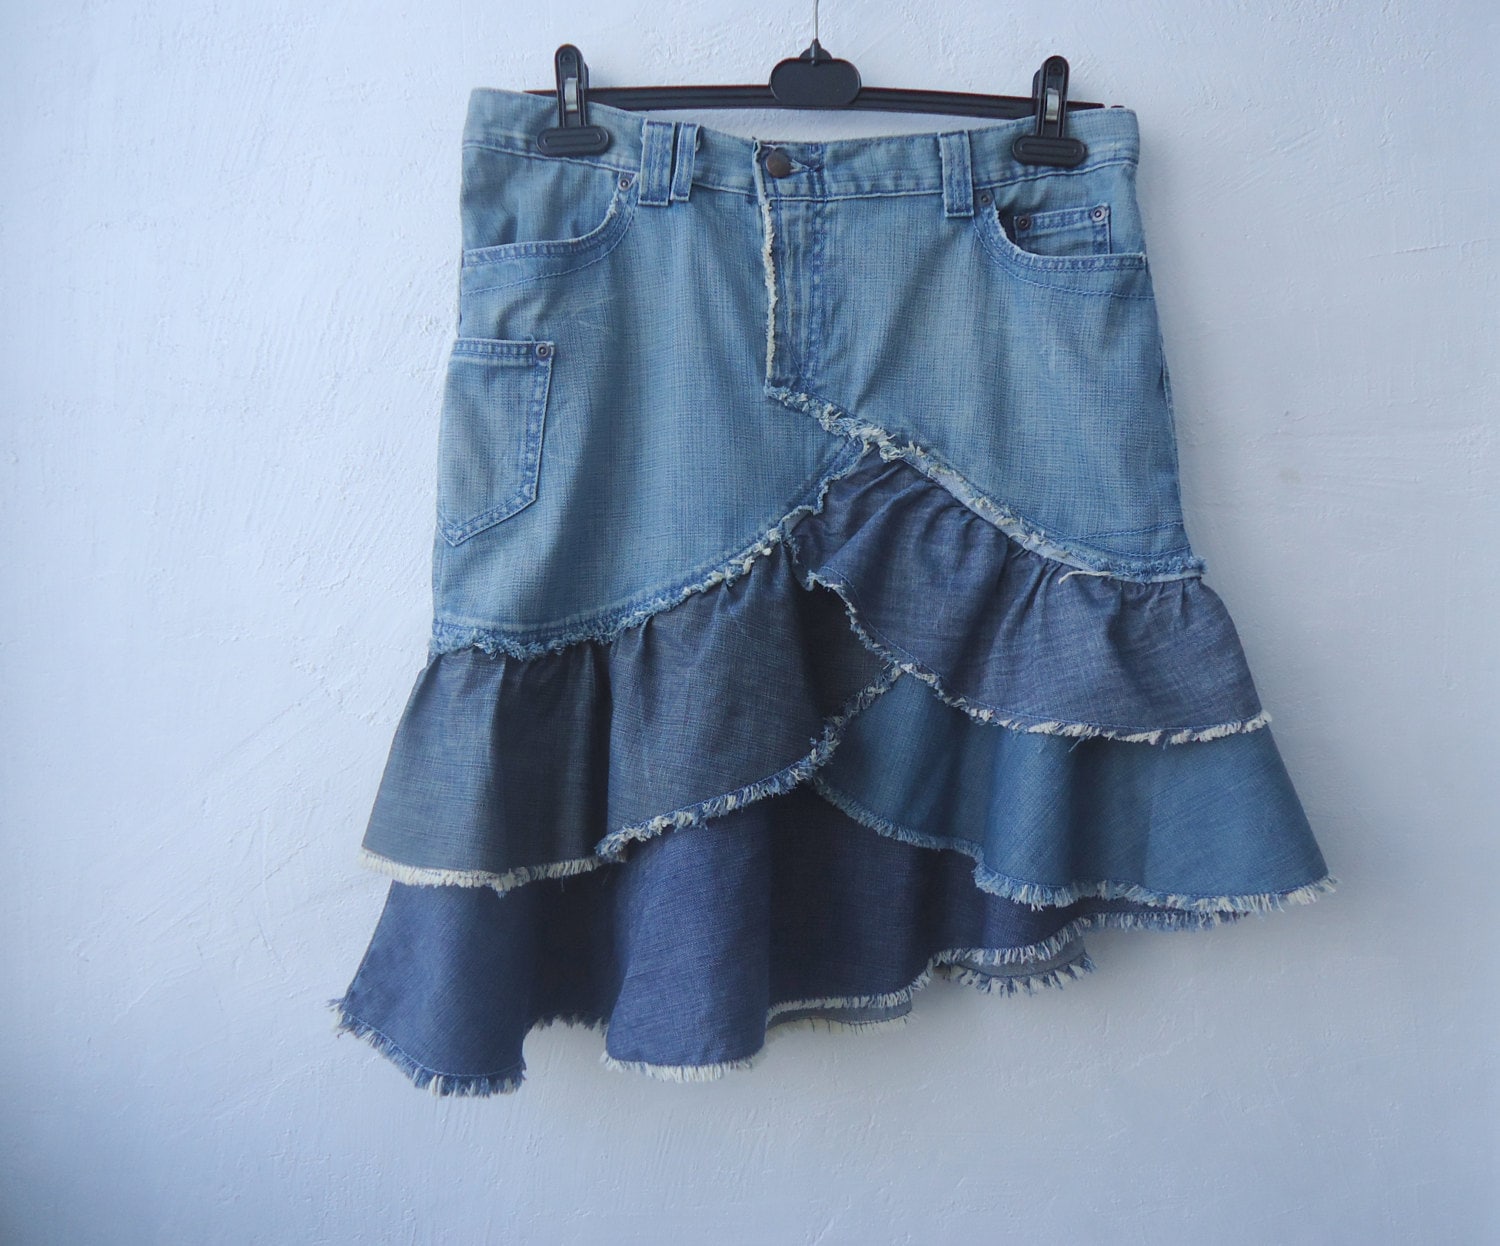 Blue Denim Ruffle Skirt Upcycled Jeans Three Tier by VintageAgency